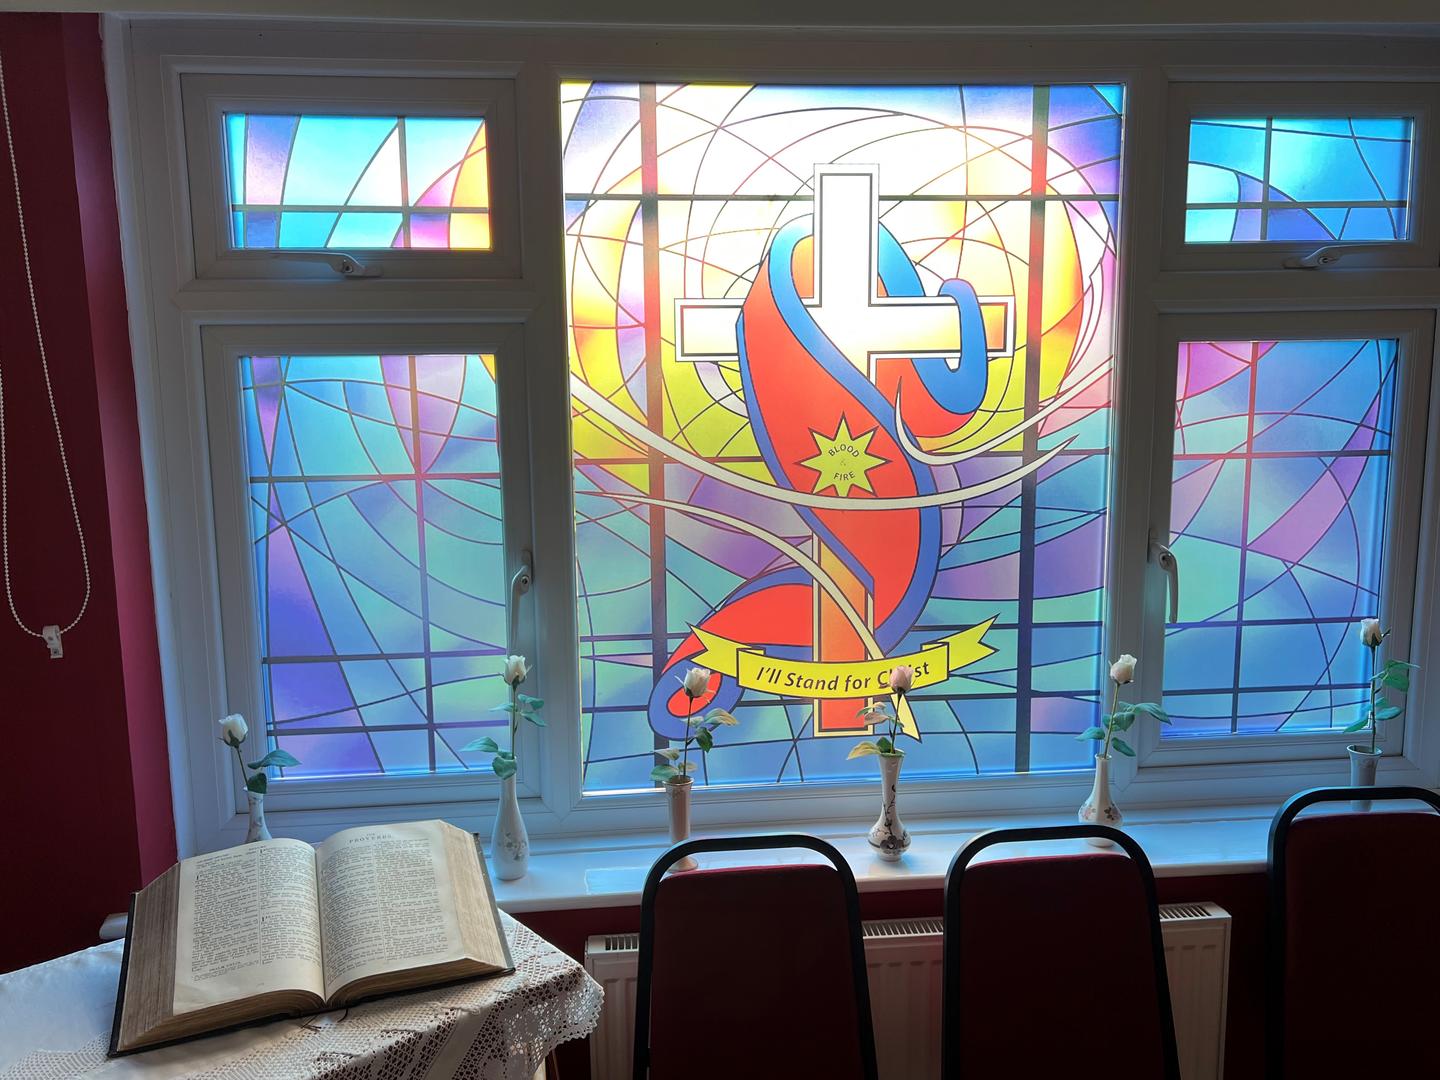 Stained glass window with flag image